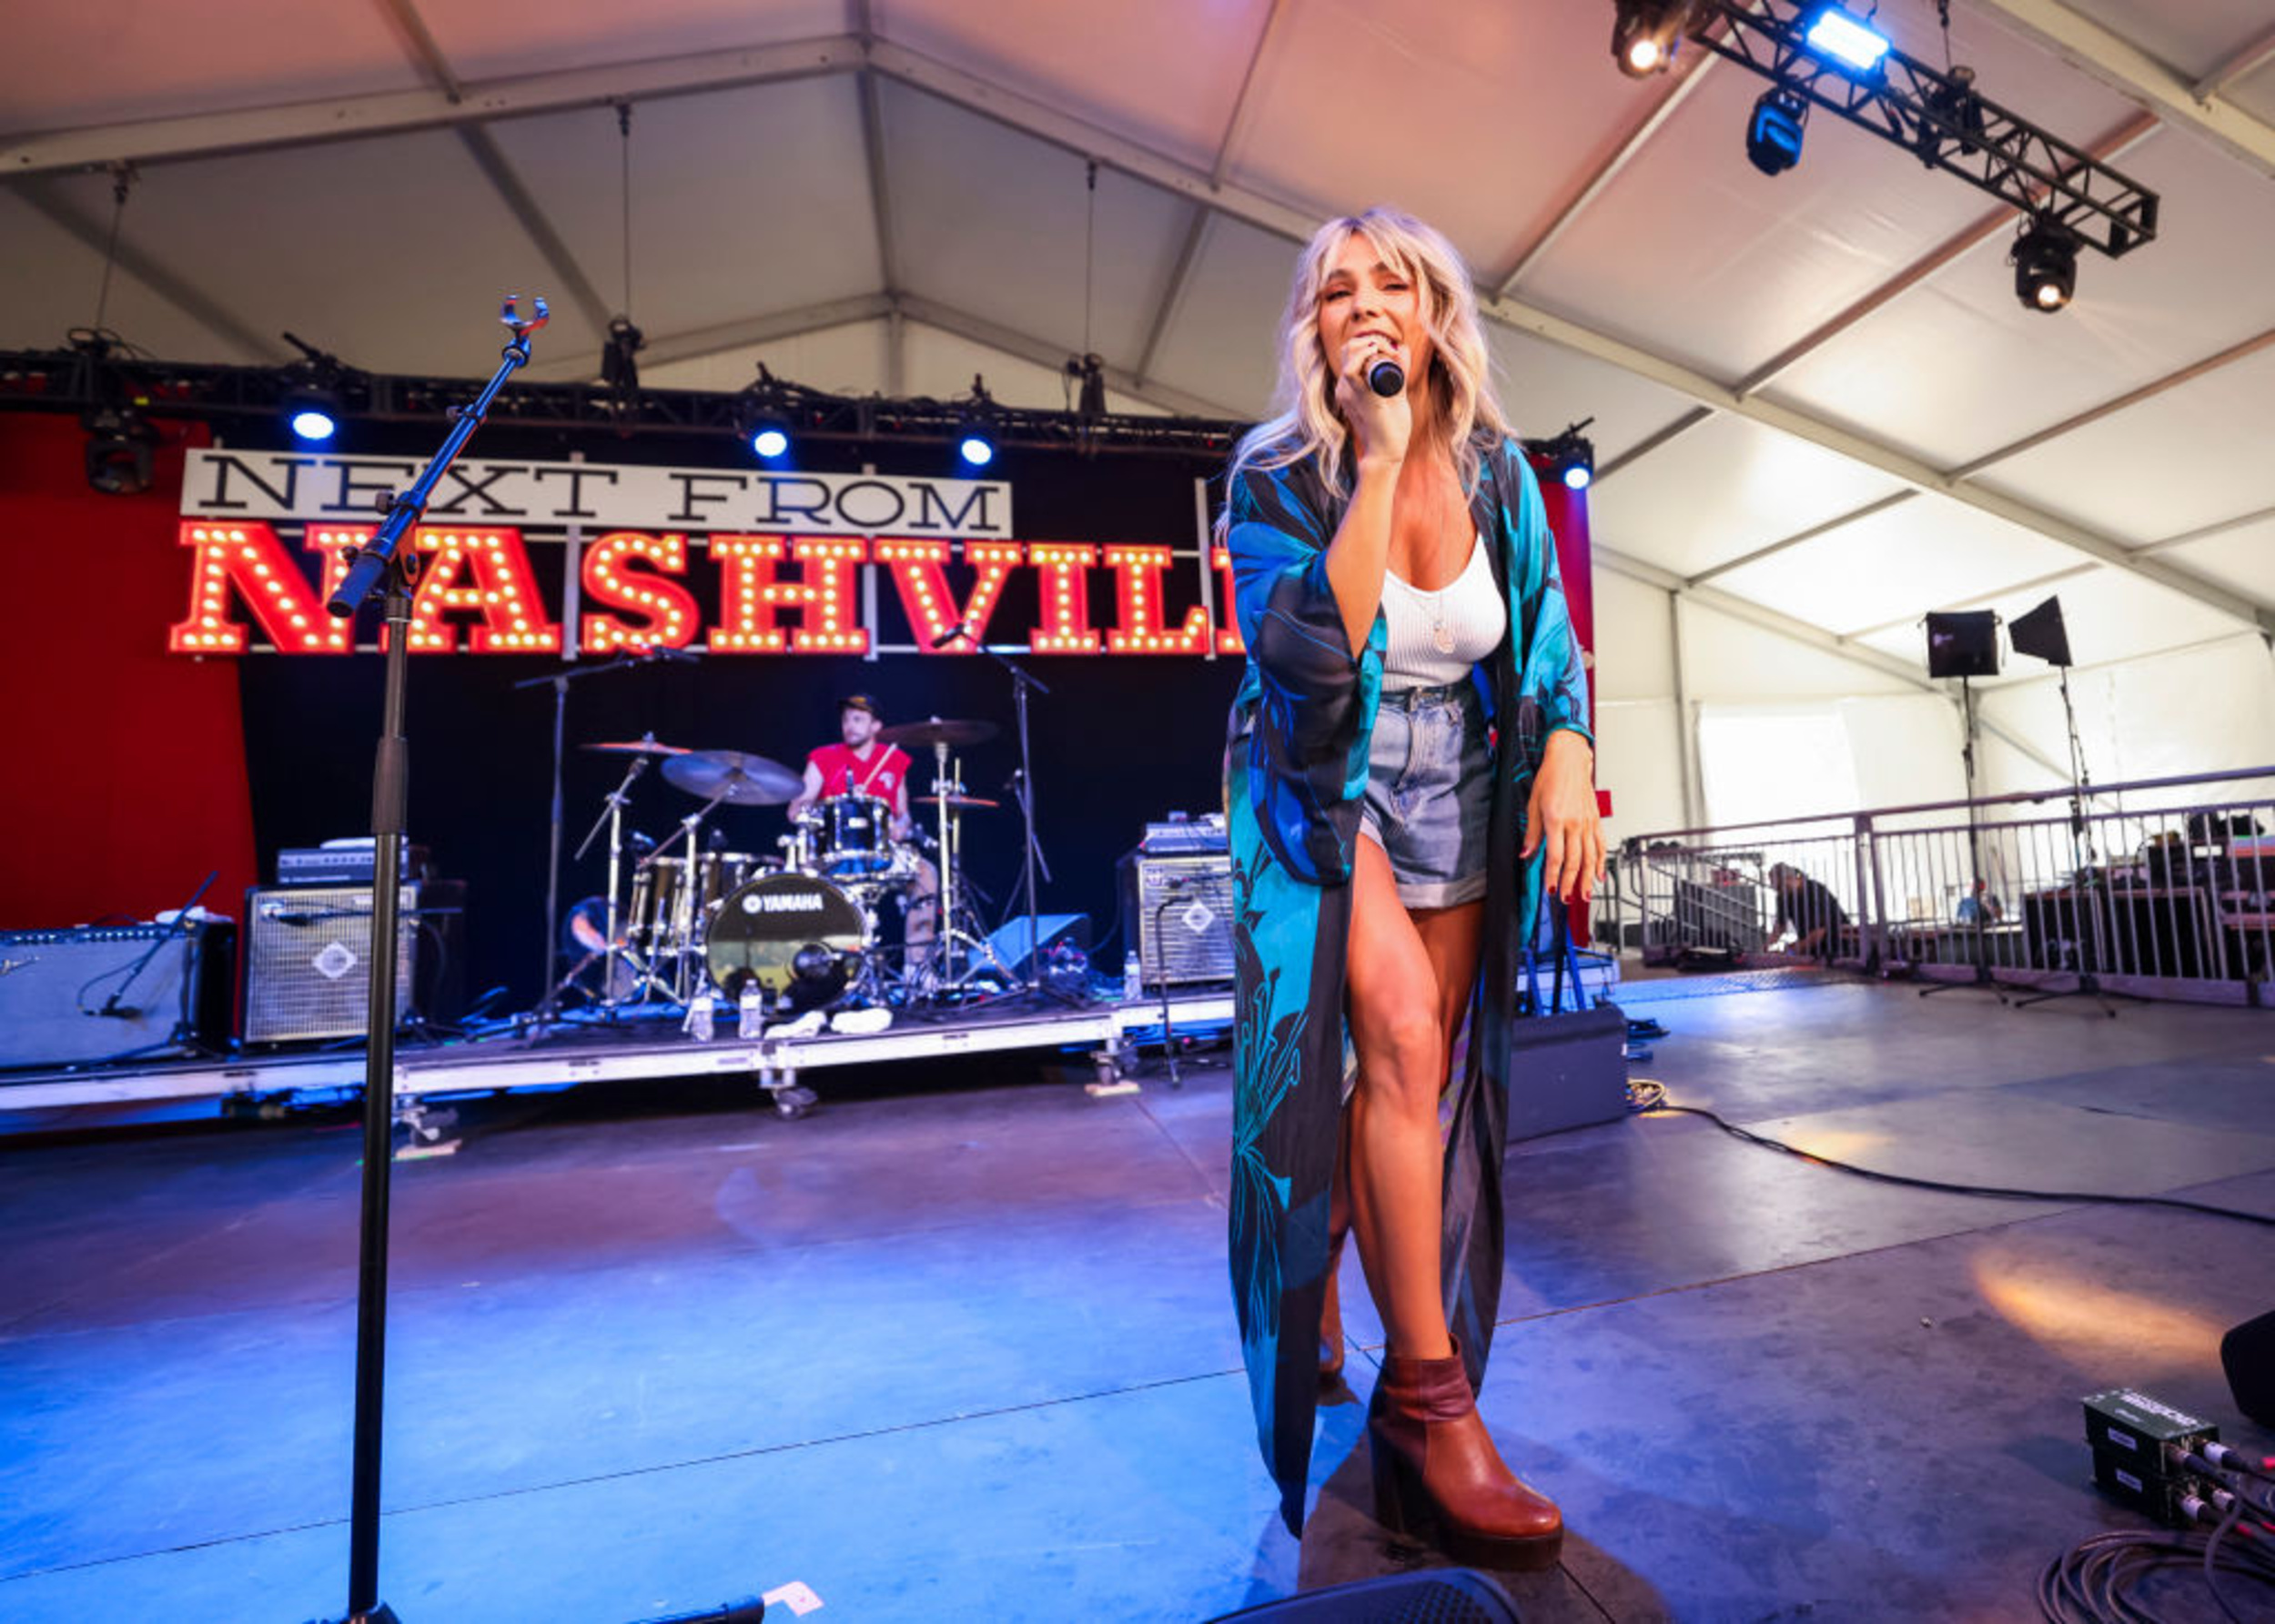 <p>A Nashville newcomer who's earned wide popularity online, Peytan Porter is headed for big things in 2024. Her sound is in the vein of artists like Miranda Lambert, Ashley McBryde, and Lainey Wilson. Her latest single "Lemonade" came out in early 2024, and she's got more new music on the way this year. </p><p><a href='https://www.msn.com/en-us/community/channel/vid-cj9pqbr0vn9in2b6ddcd8sfgpfq6x6utp44fssrv6mc2gtybw0us'>Follow us on MSN to see more of our exclusive entertainment content.</a></p>